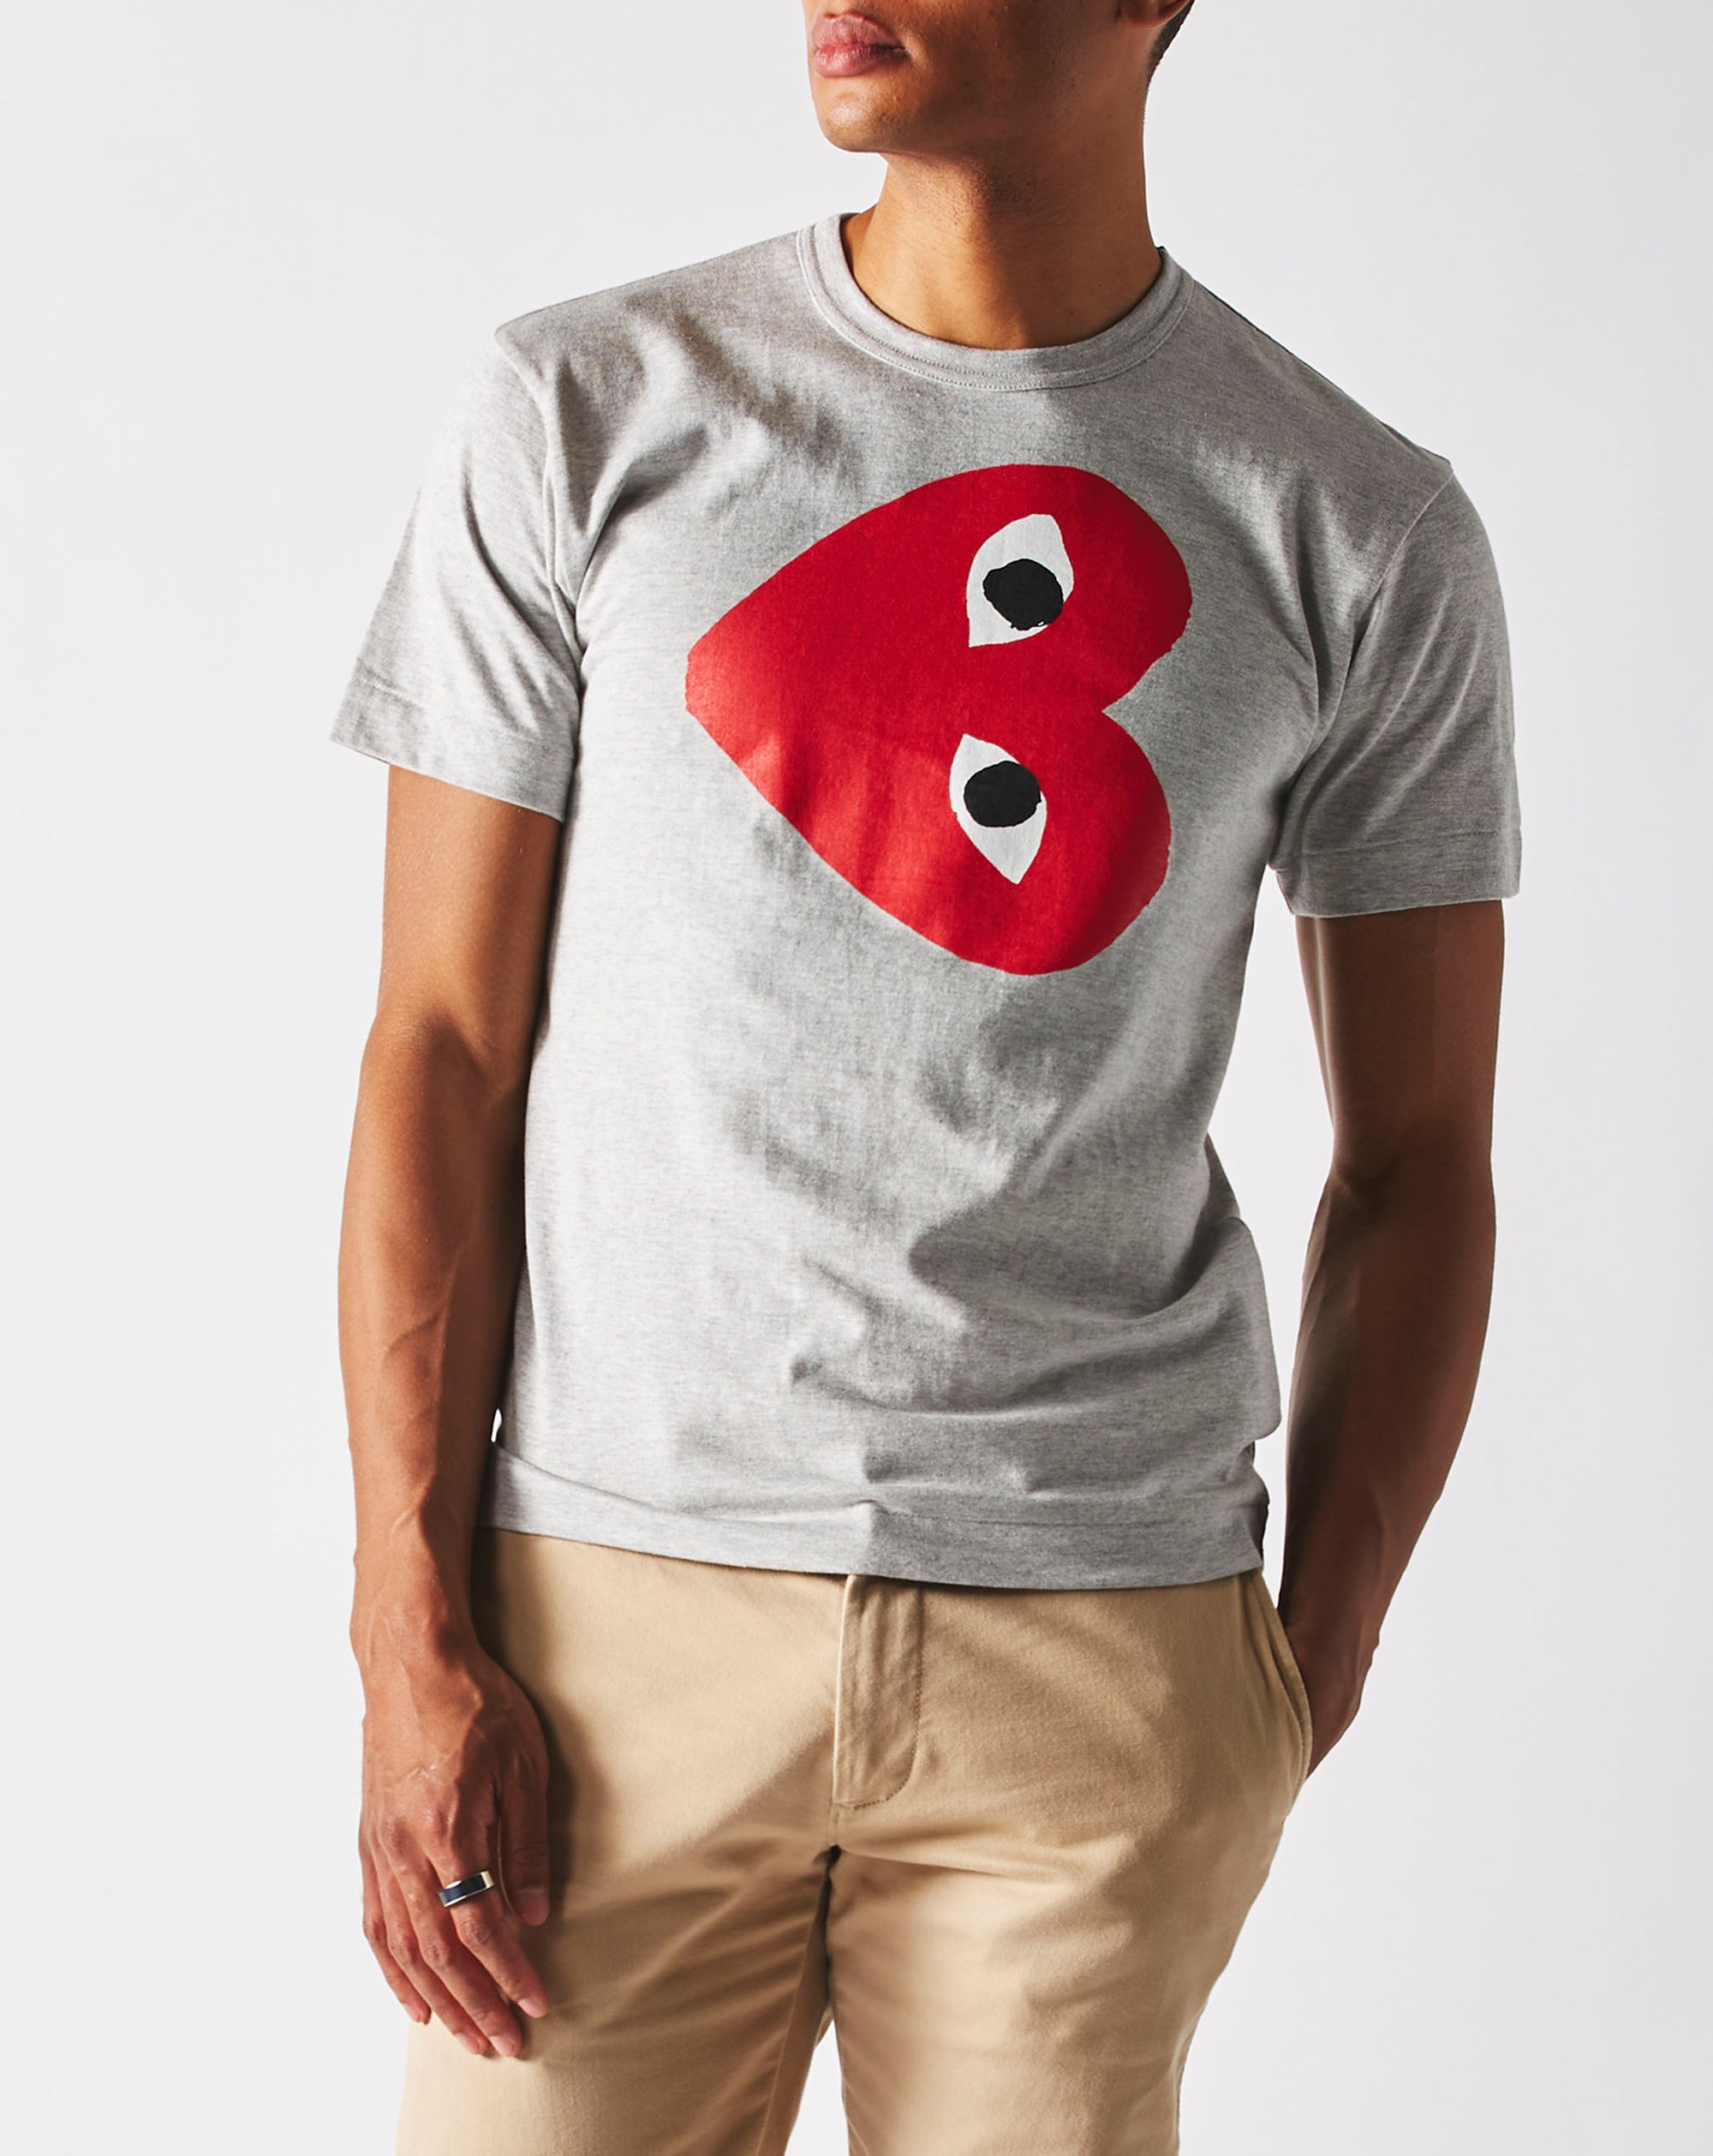 Comme des Garcons PLAY Sideways Red Heart T-Shirt - Rule of Next Apparel